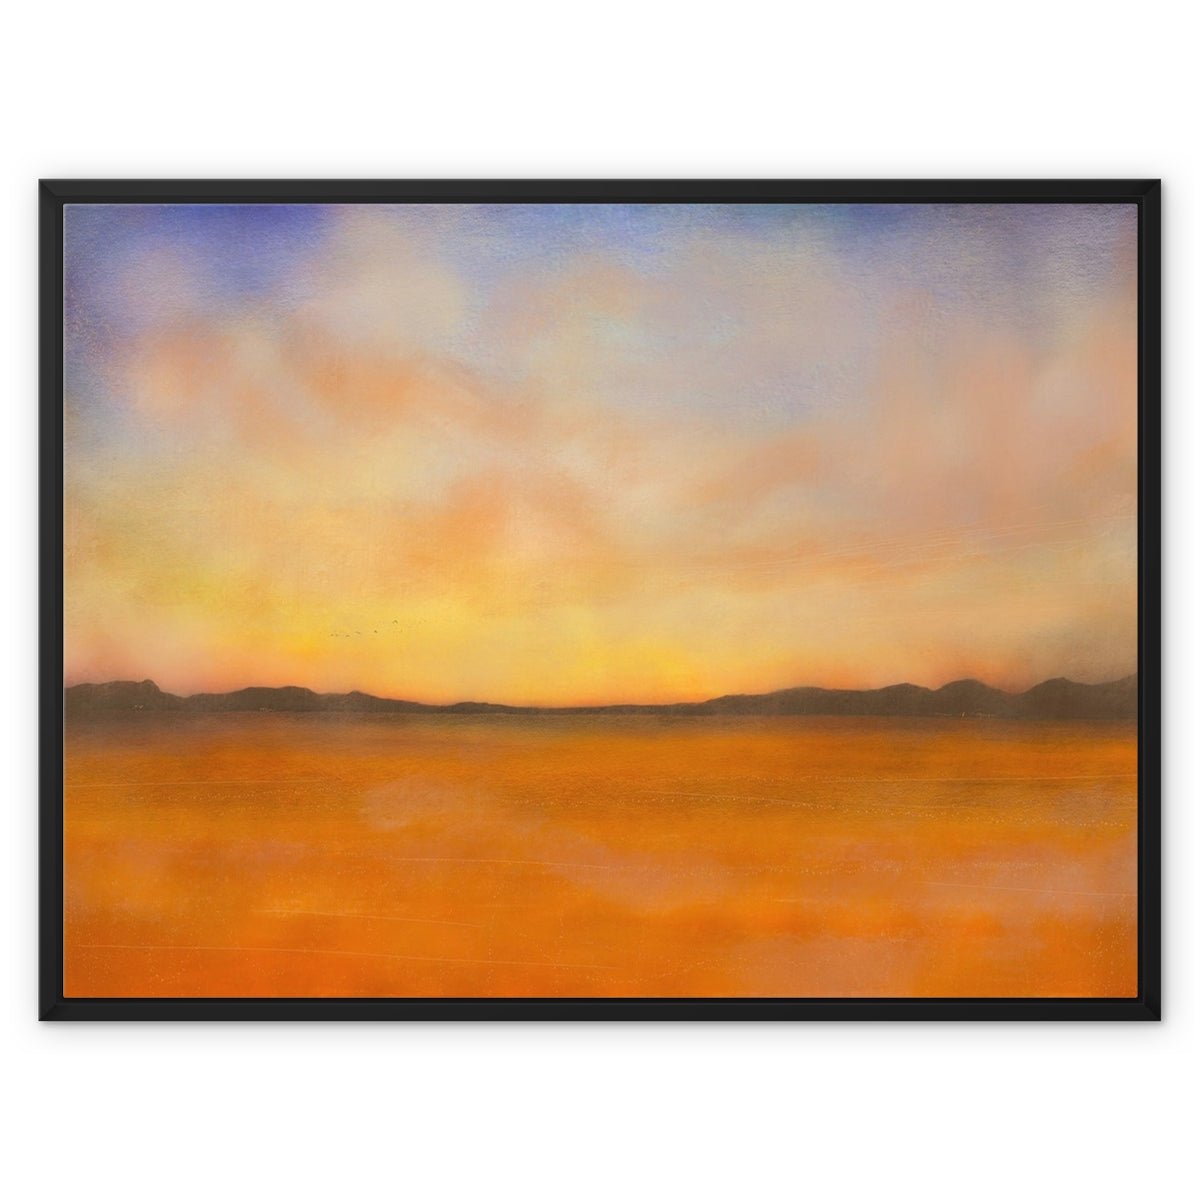 Islay Dawn Painting | Framed Canvas From Scotland-Floating Framed Canvas Prints-Hebridean Islands Art Gallery-32"x24"-Black Frame-Paintings, Prints, Homeware, Art Gifts From Scotland By Scottish Artist Kevin Hunter